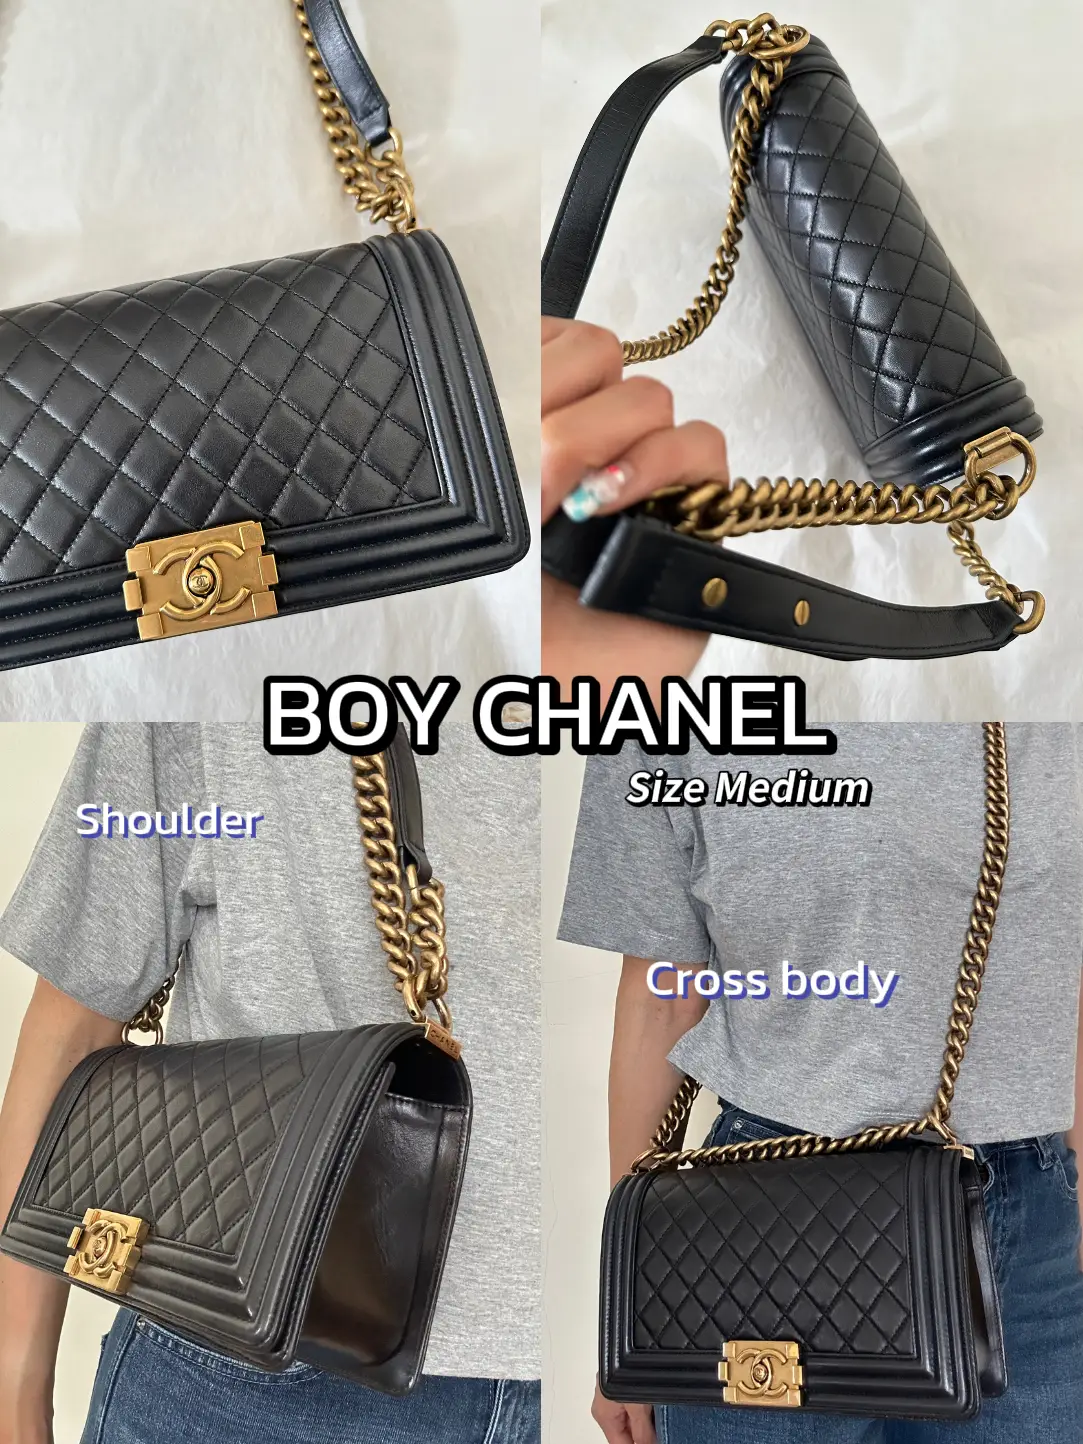 The Chanel Boy Guide